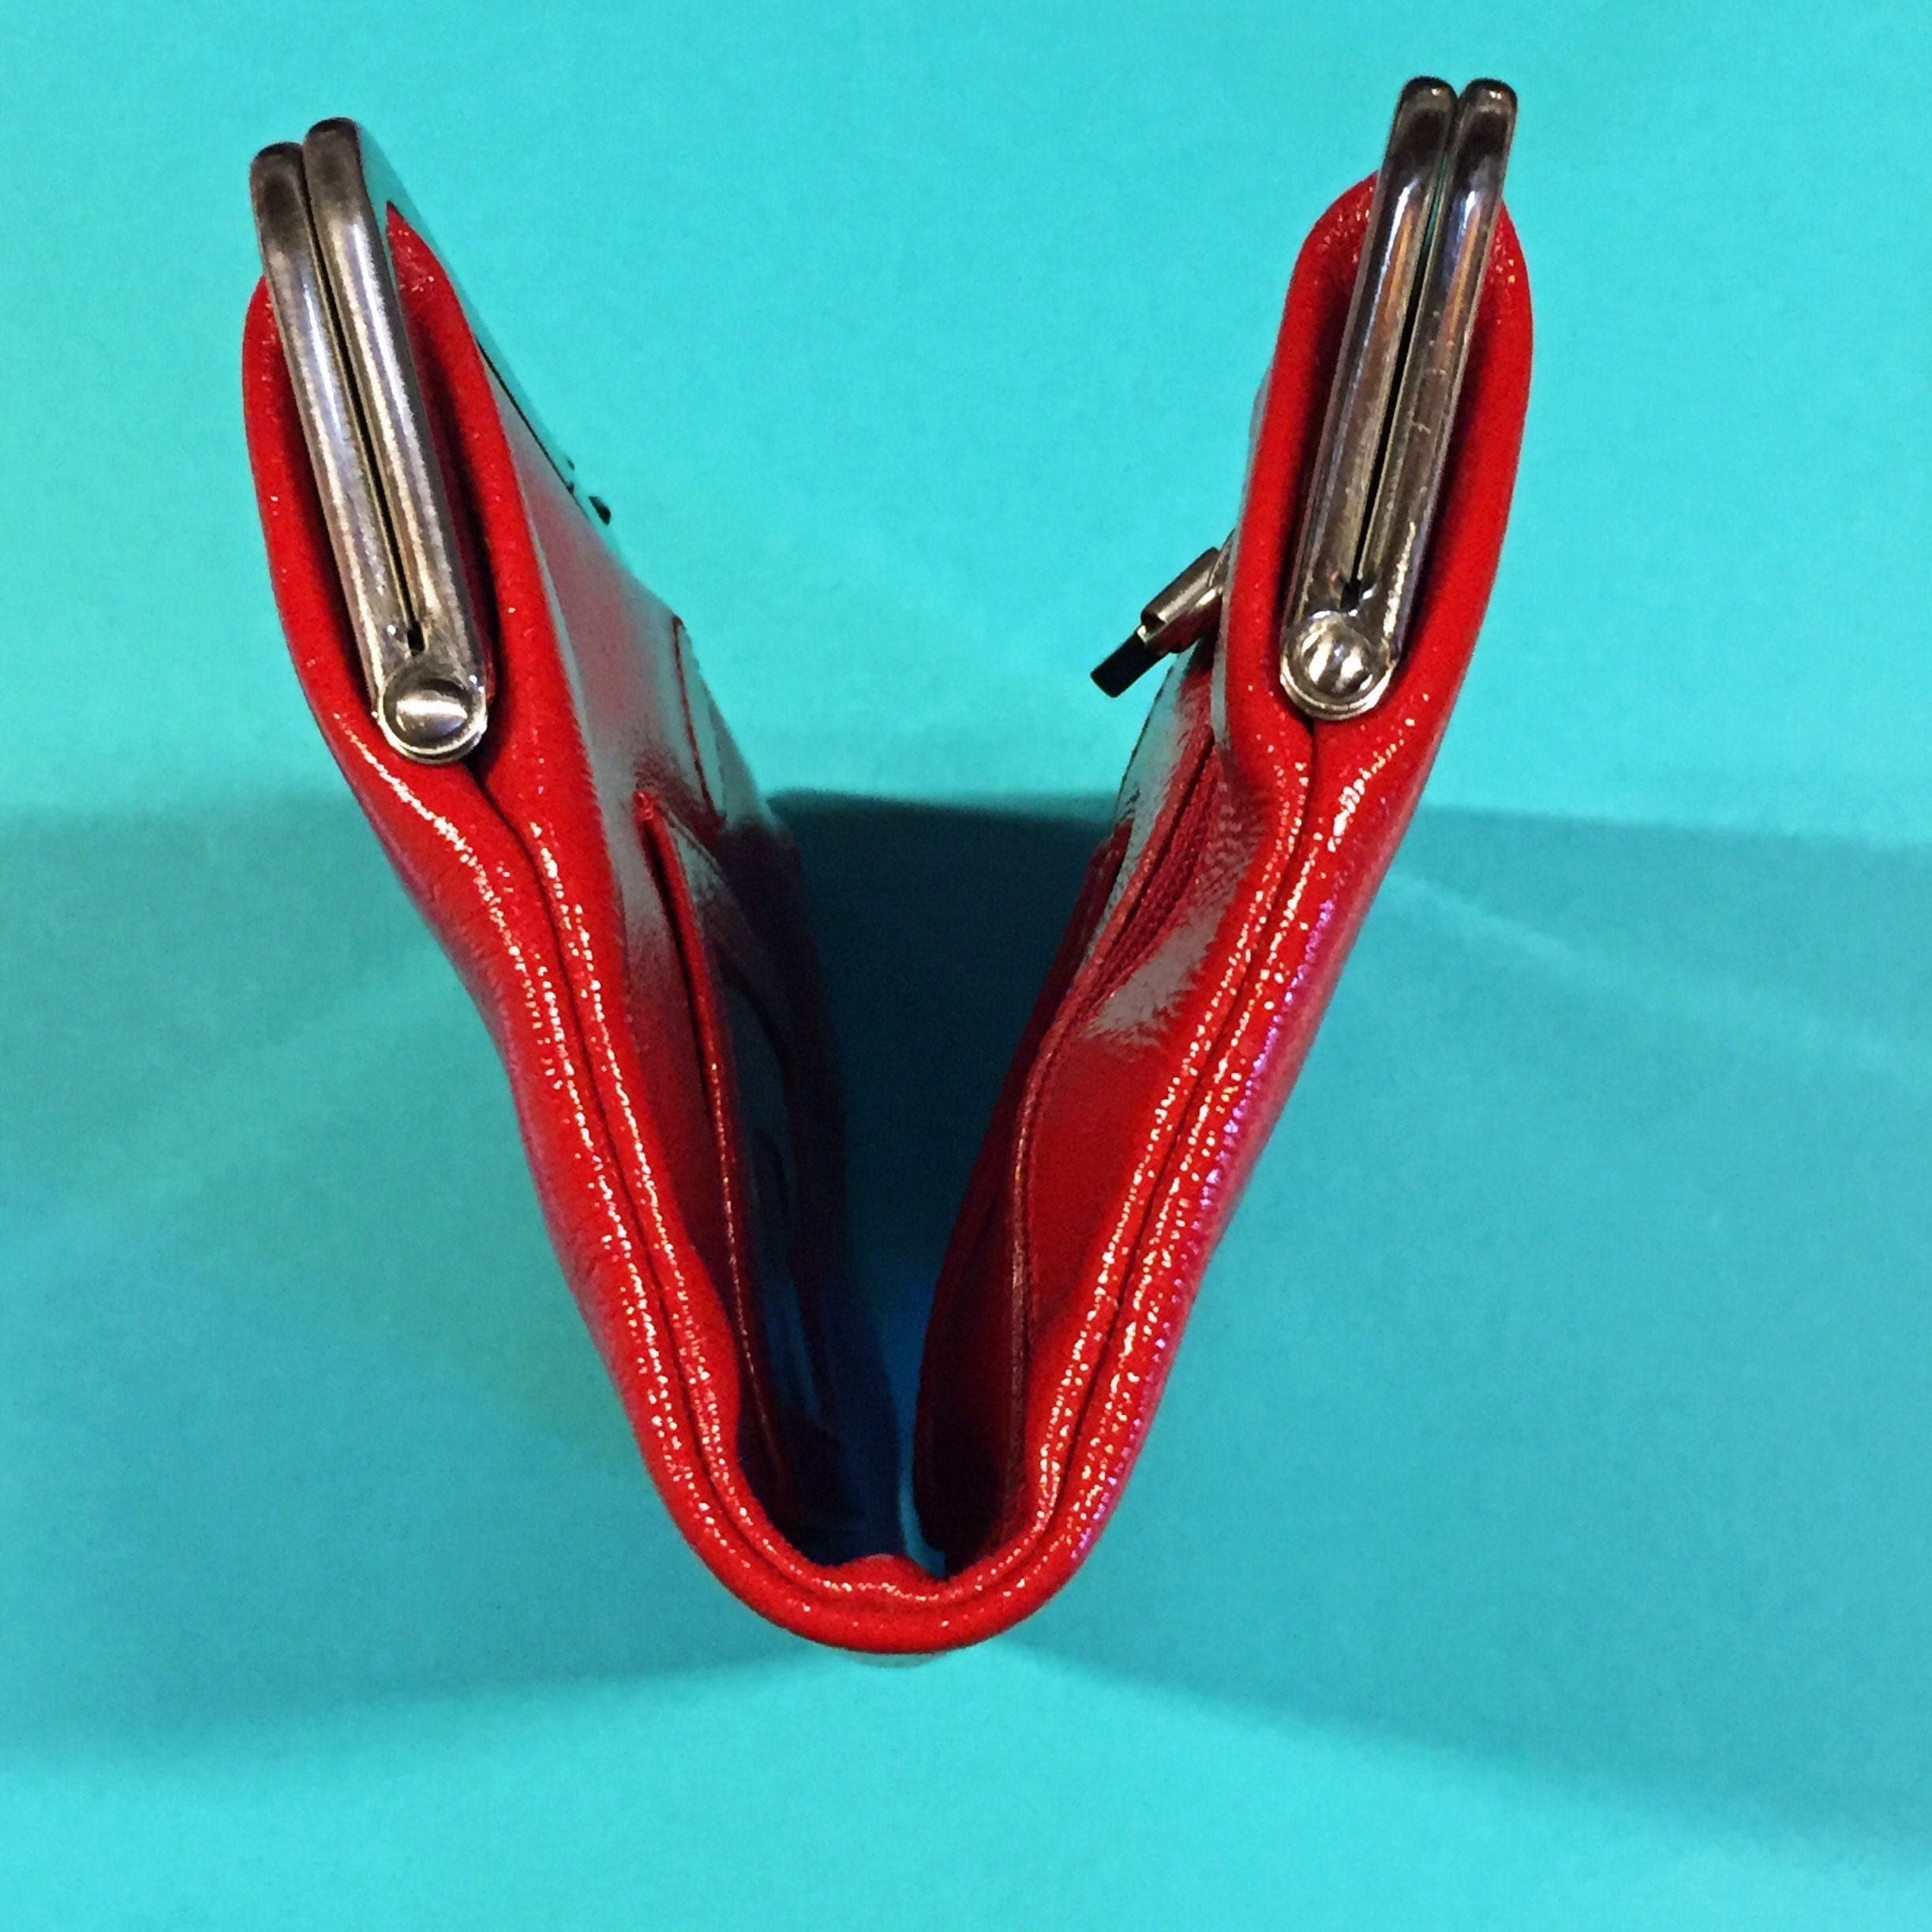 Women's Red Glossy Patent Leather Wallet With Card Holder